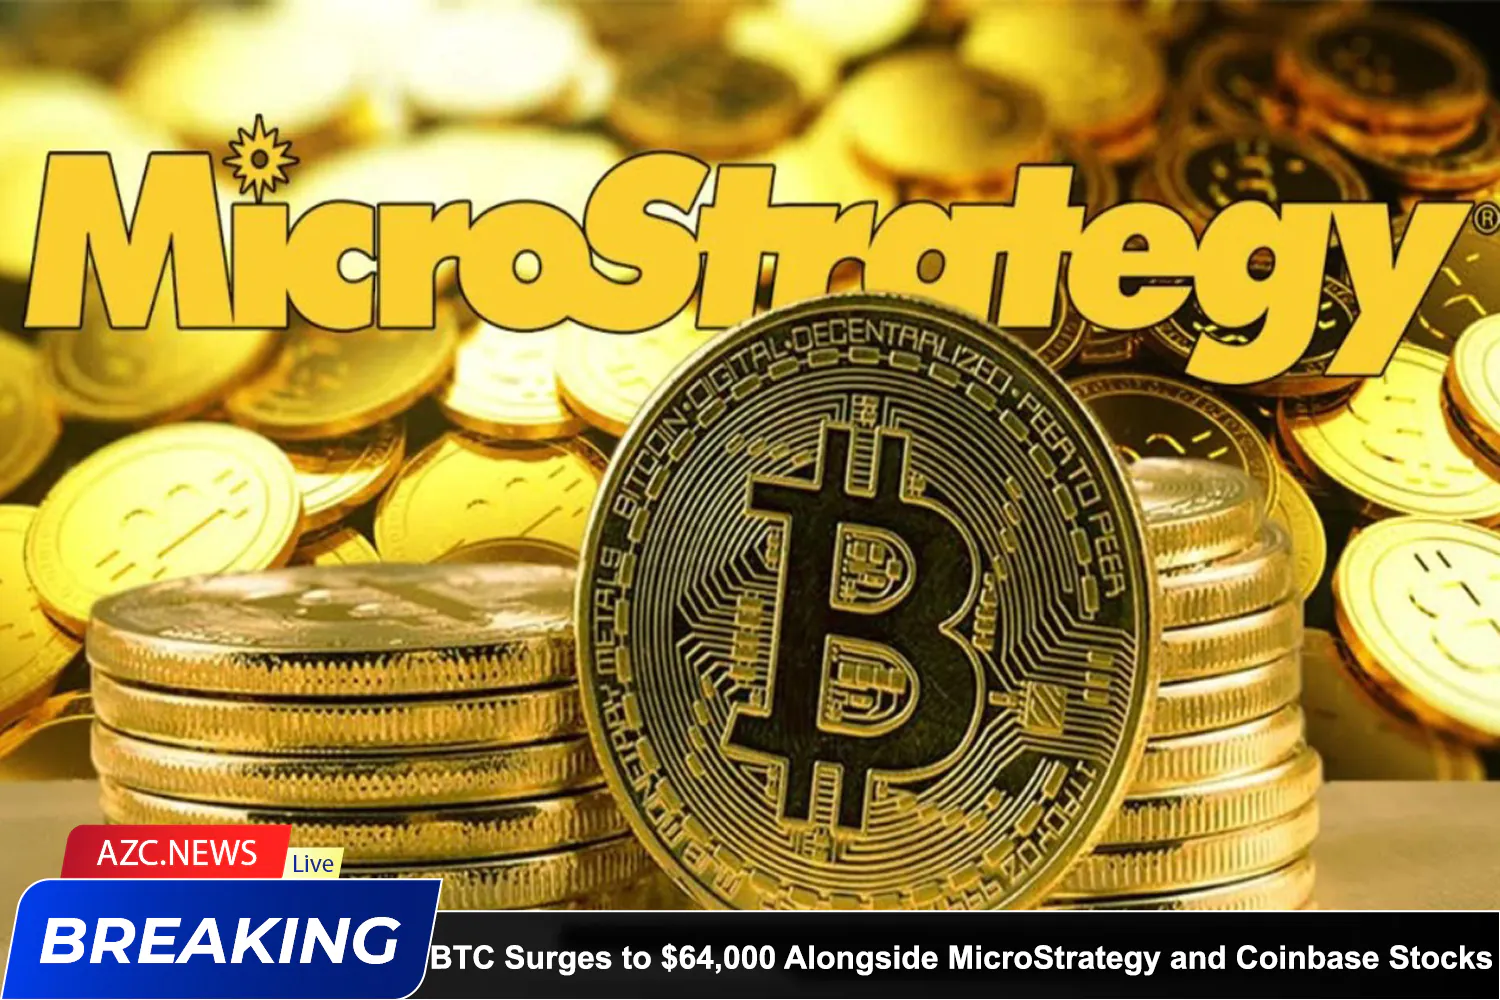 Azcnews Bitcoin Surges To $64,000 Alongside Microstrategy And Coinbase Stocks